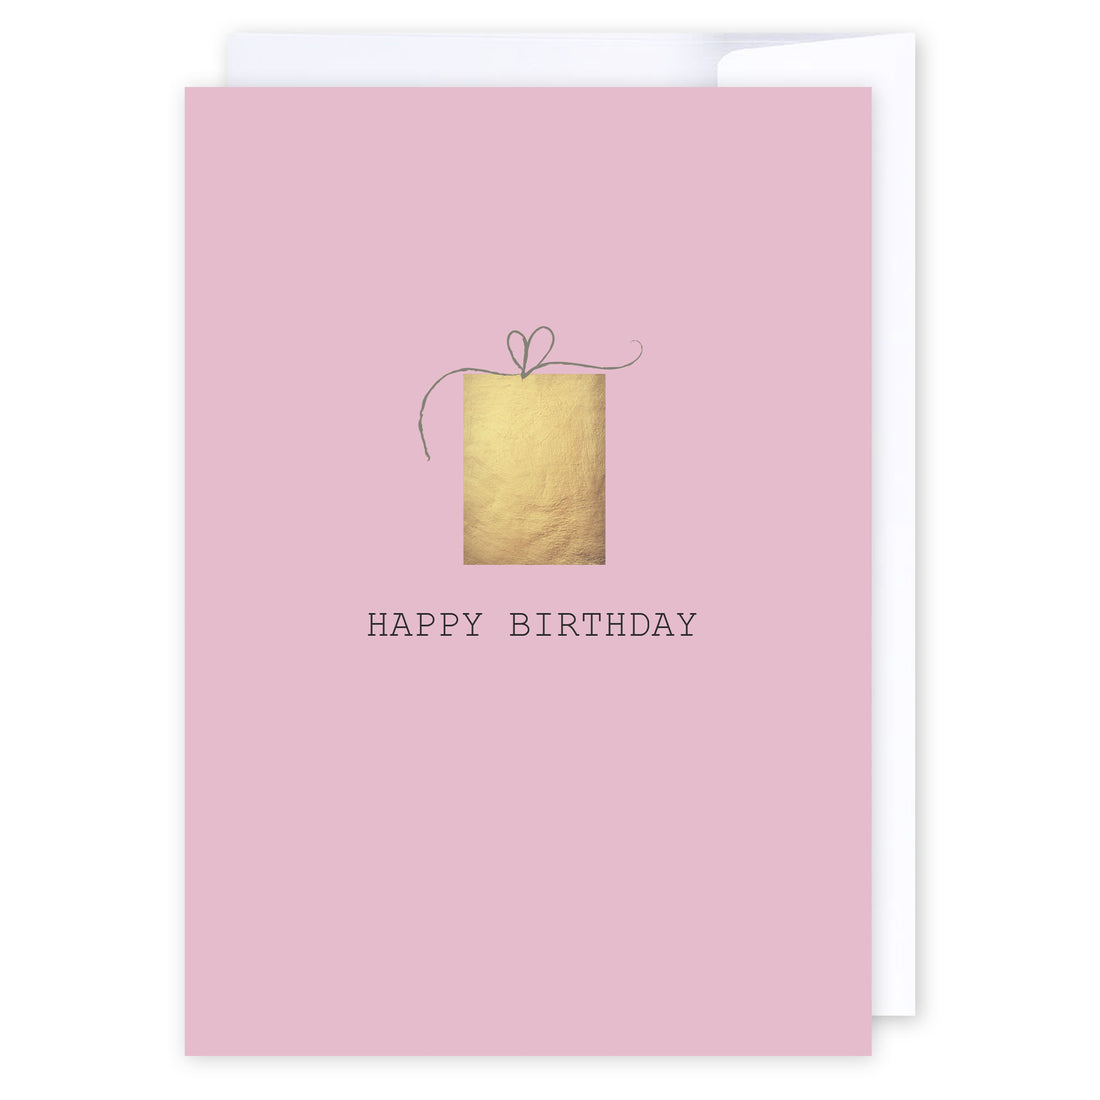 Happy birthday pink and gold gift